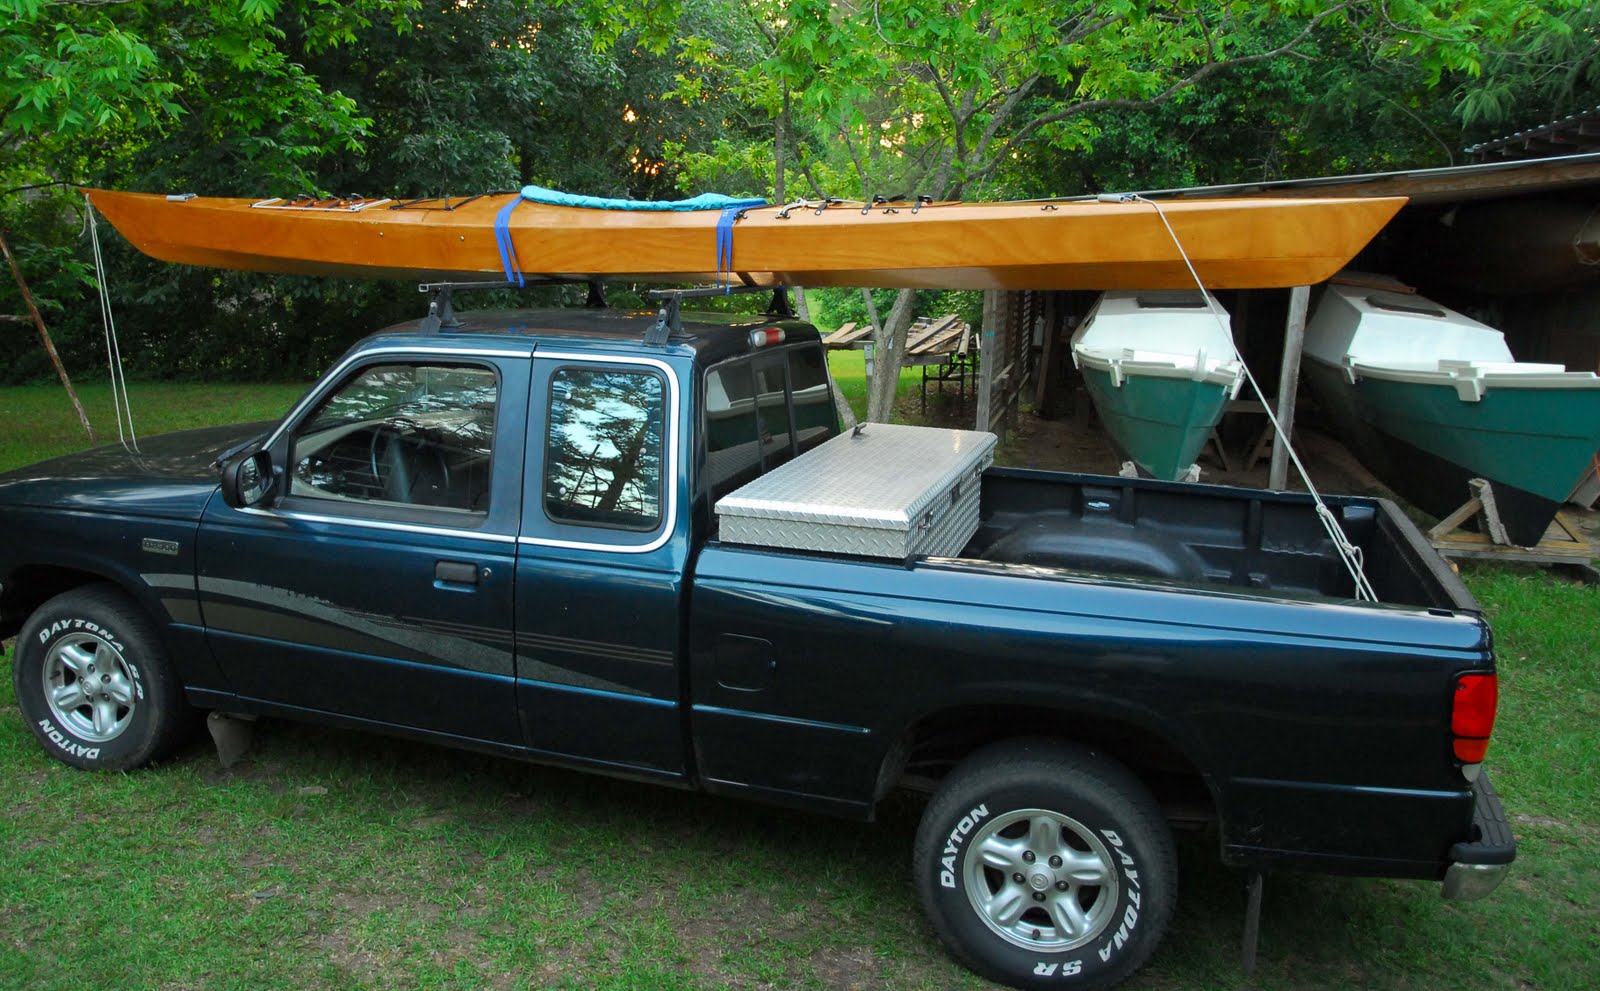 Daily Survival: Roof Racks for Your Bug Out Vehicle